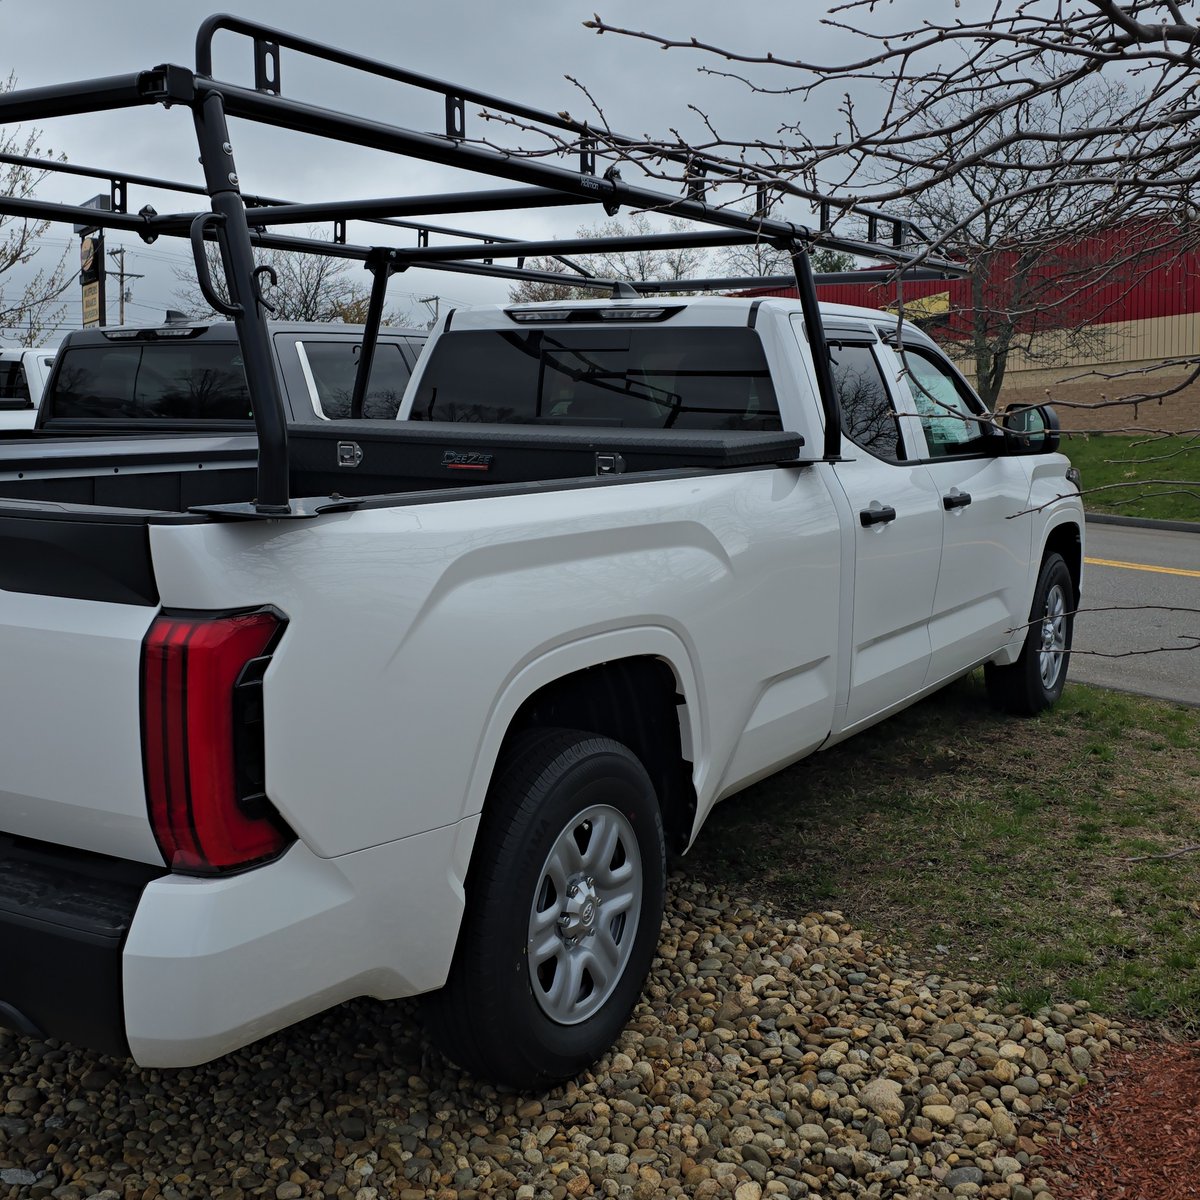 ⚠️ Attention Contractors!

We have 2 brand-new Long Bed Tundra models available now. Upgrade today! #LetsGoPlaces #IraToyotaOfManchester